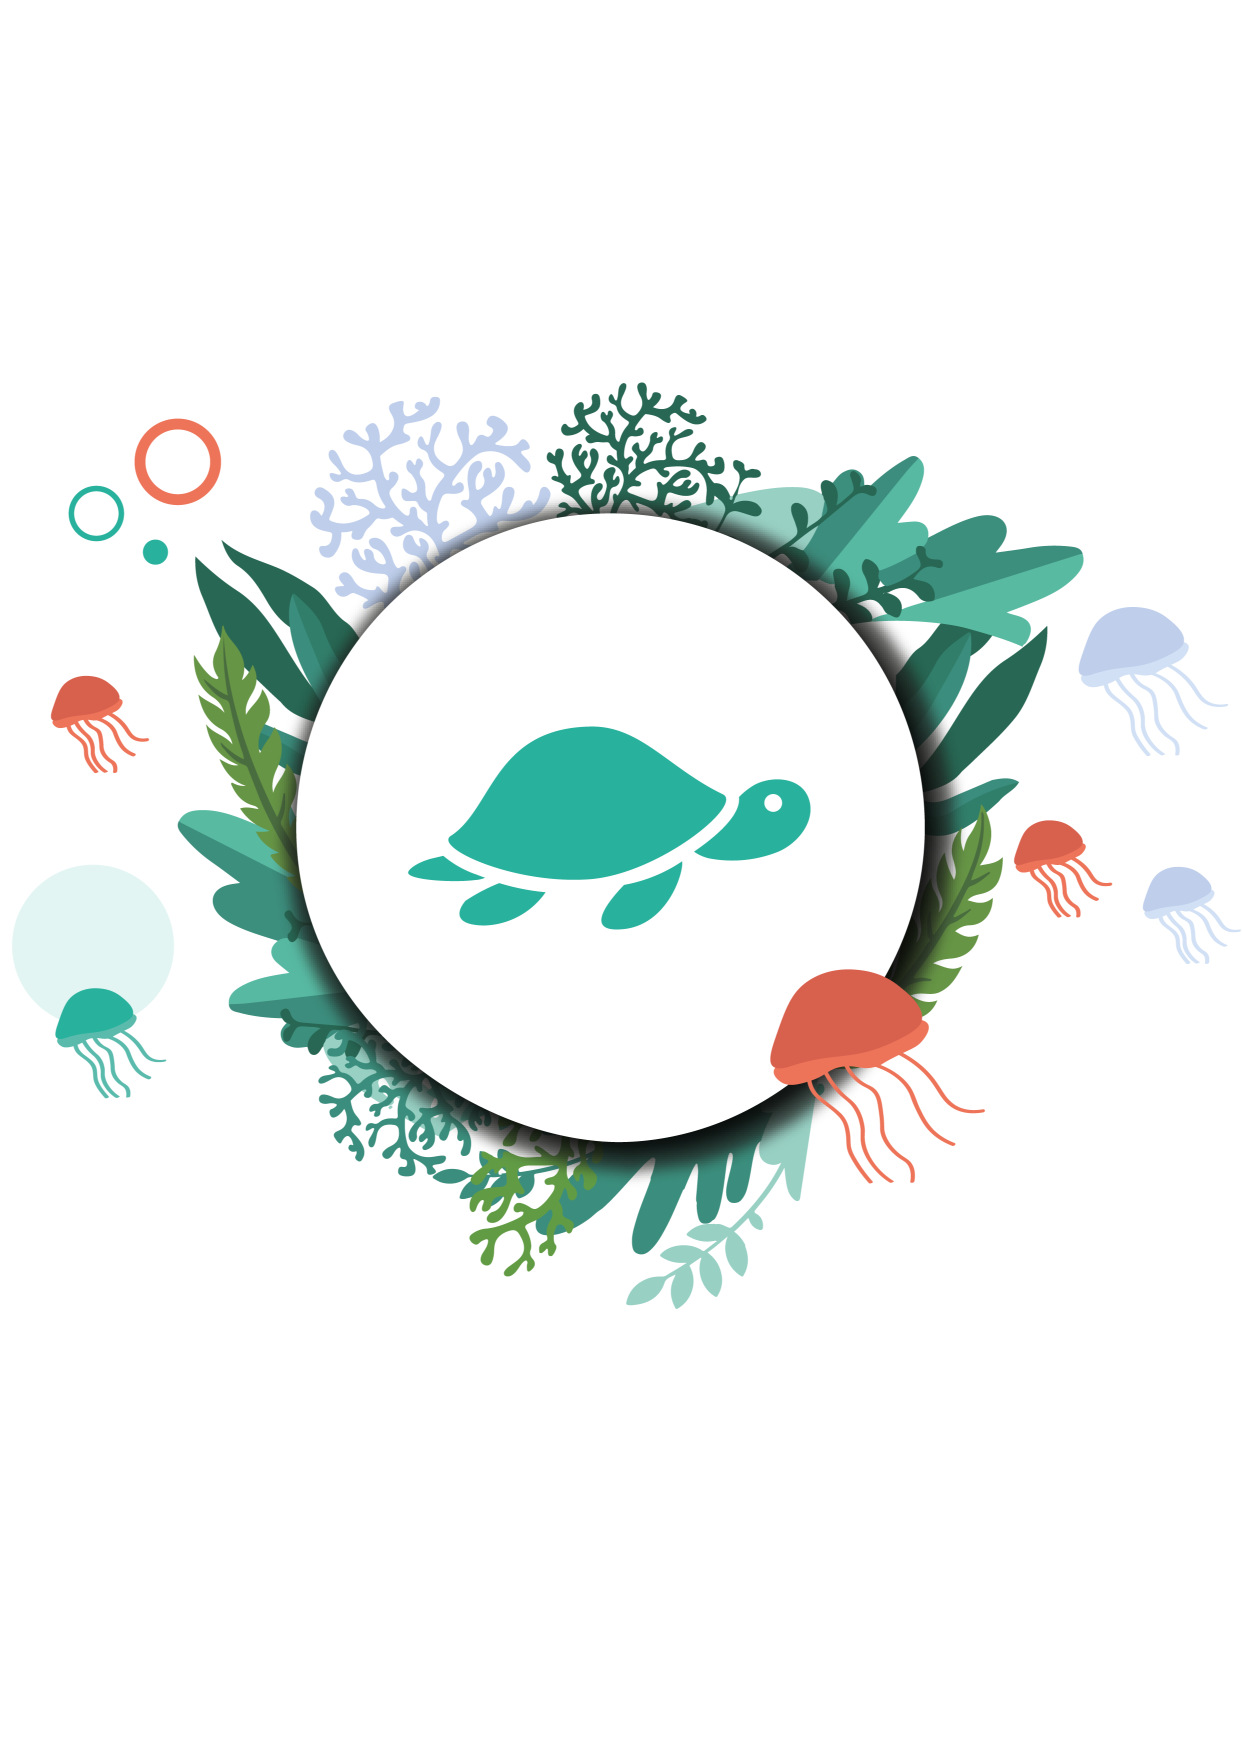 A sea turtle and jellyfish in the ocean representing the main theme of the project: the monitoring and protection of sea turtles.